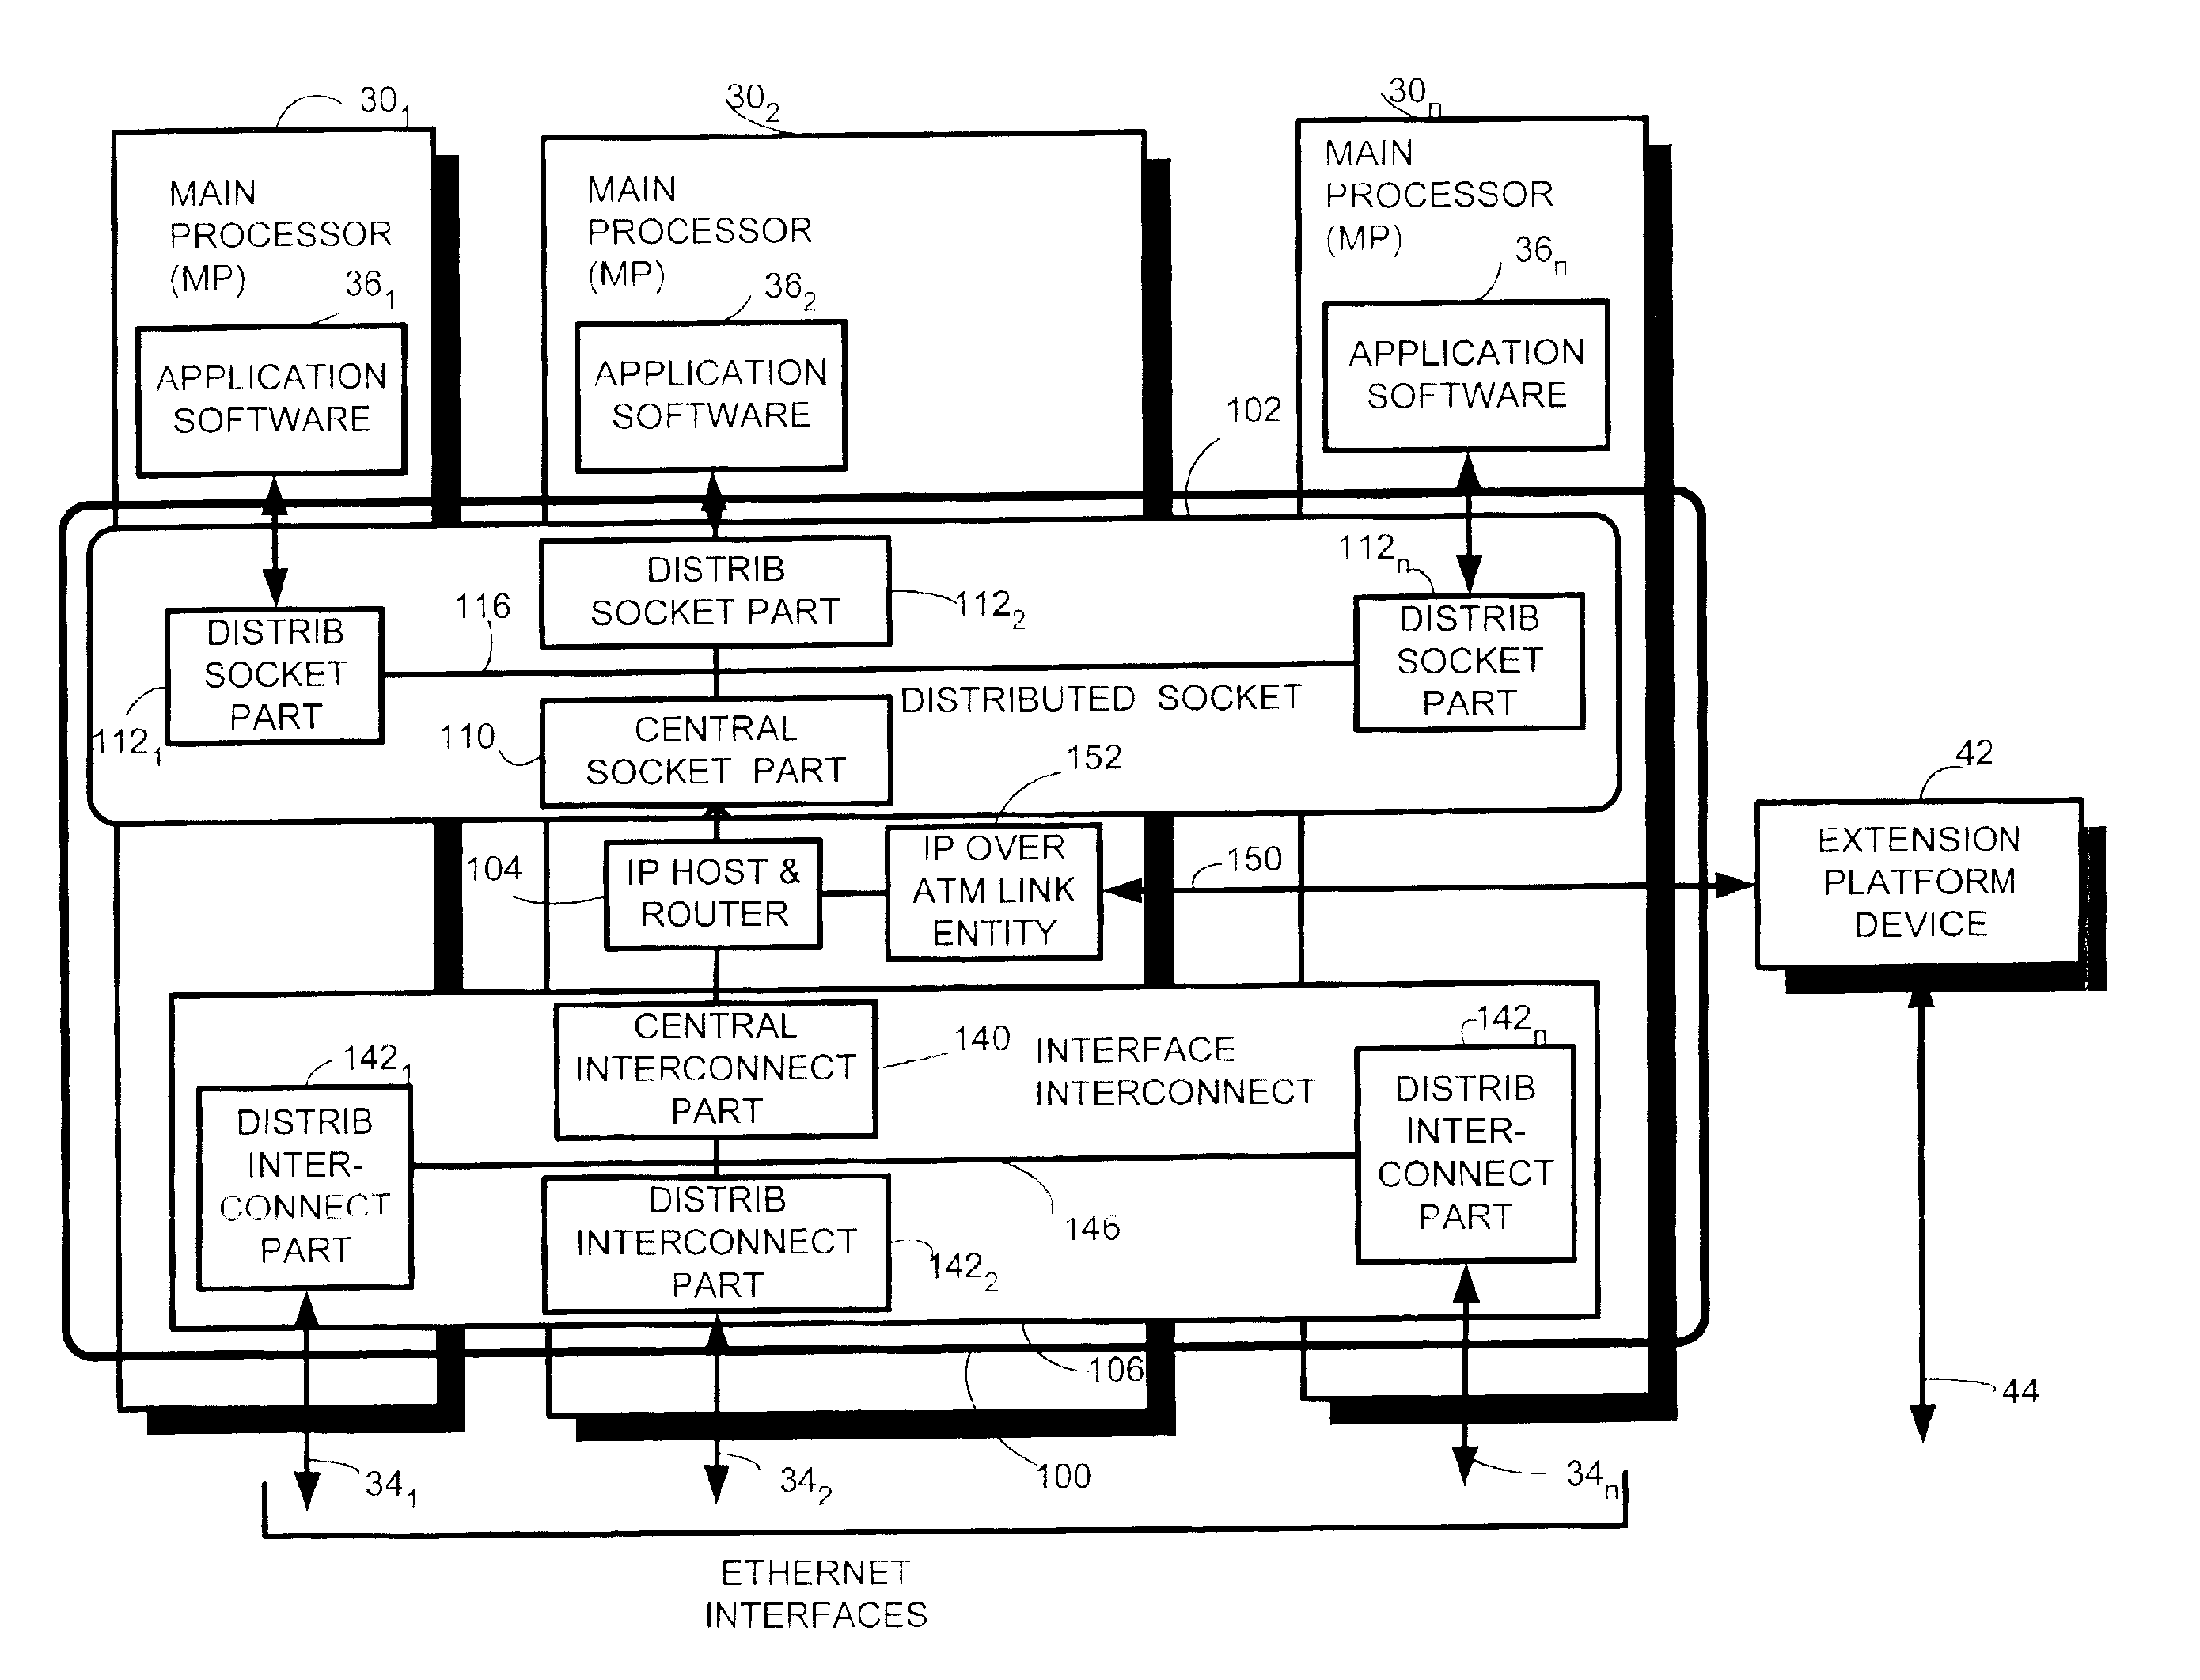 Single IP-addressing for a telecommunications platform with a multi-processor cluster using a distributed socket based internet protocol (IP) handler